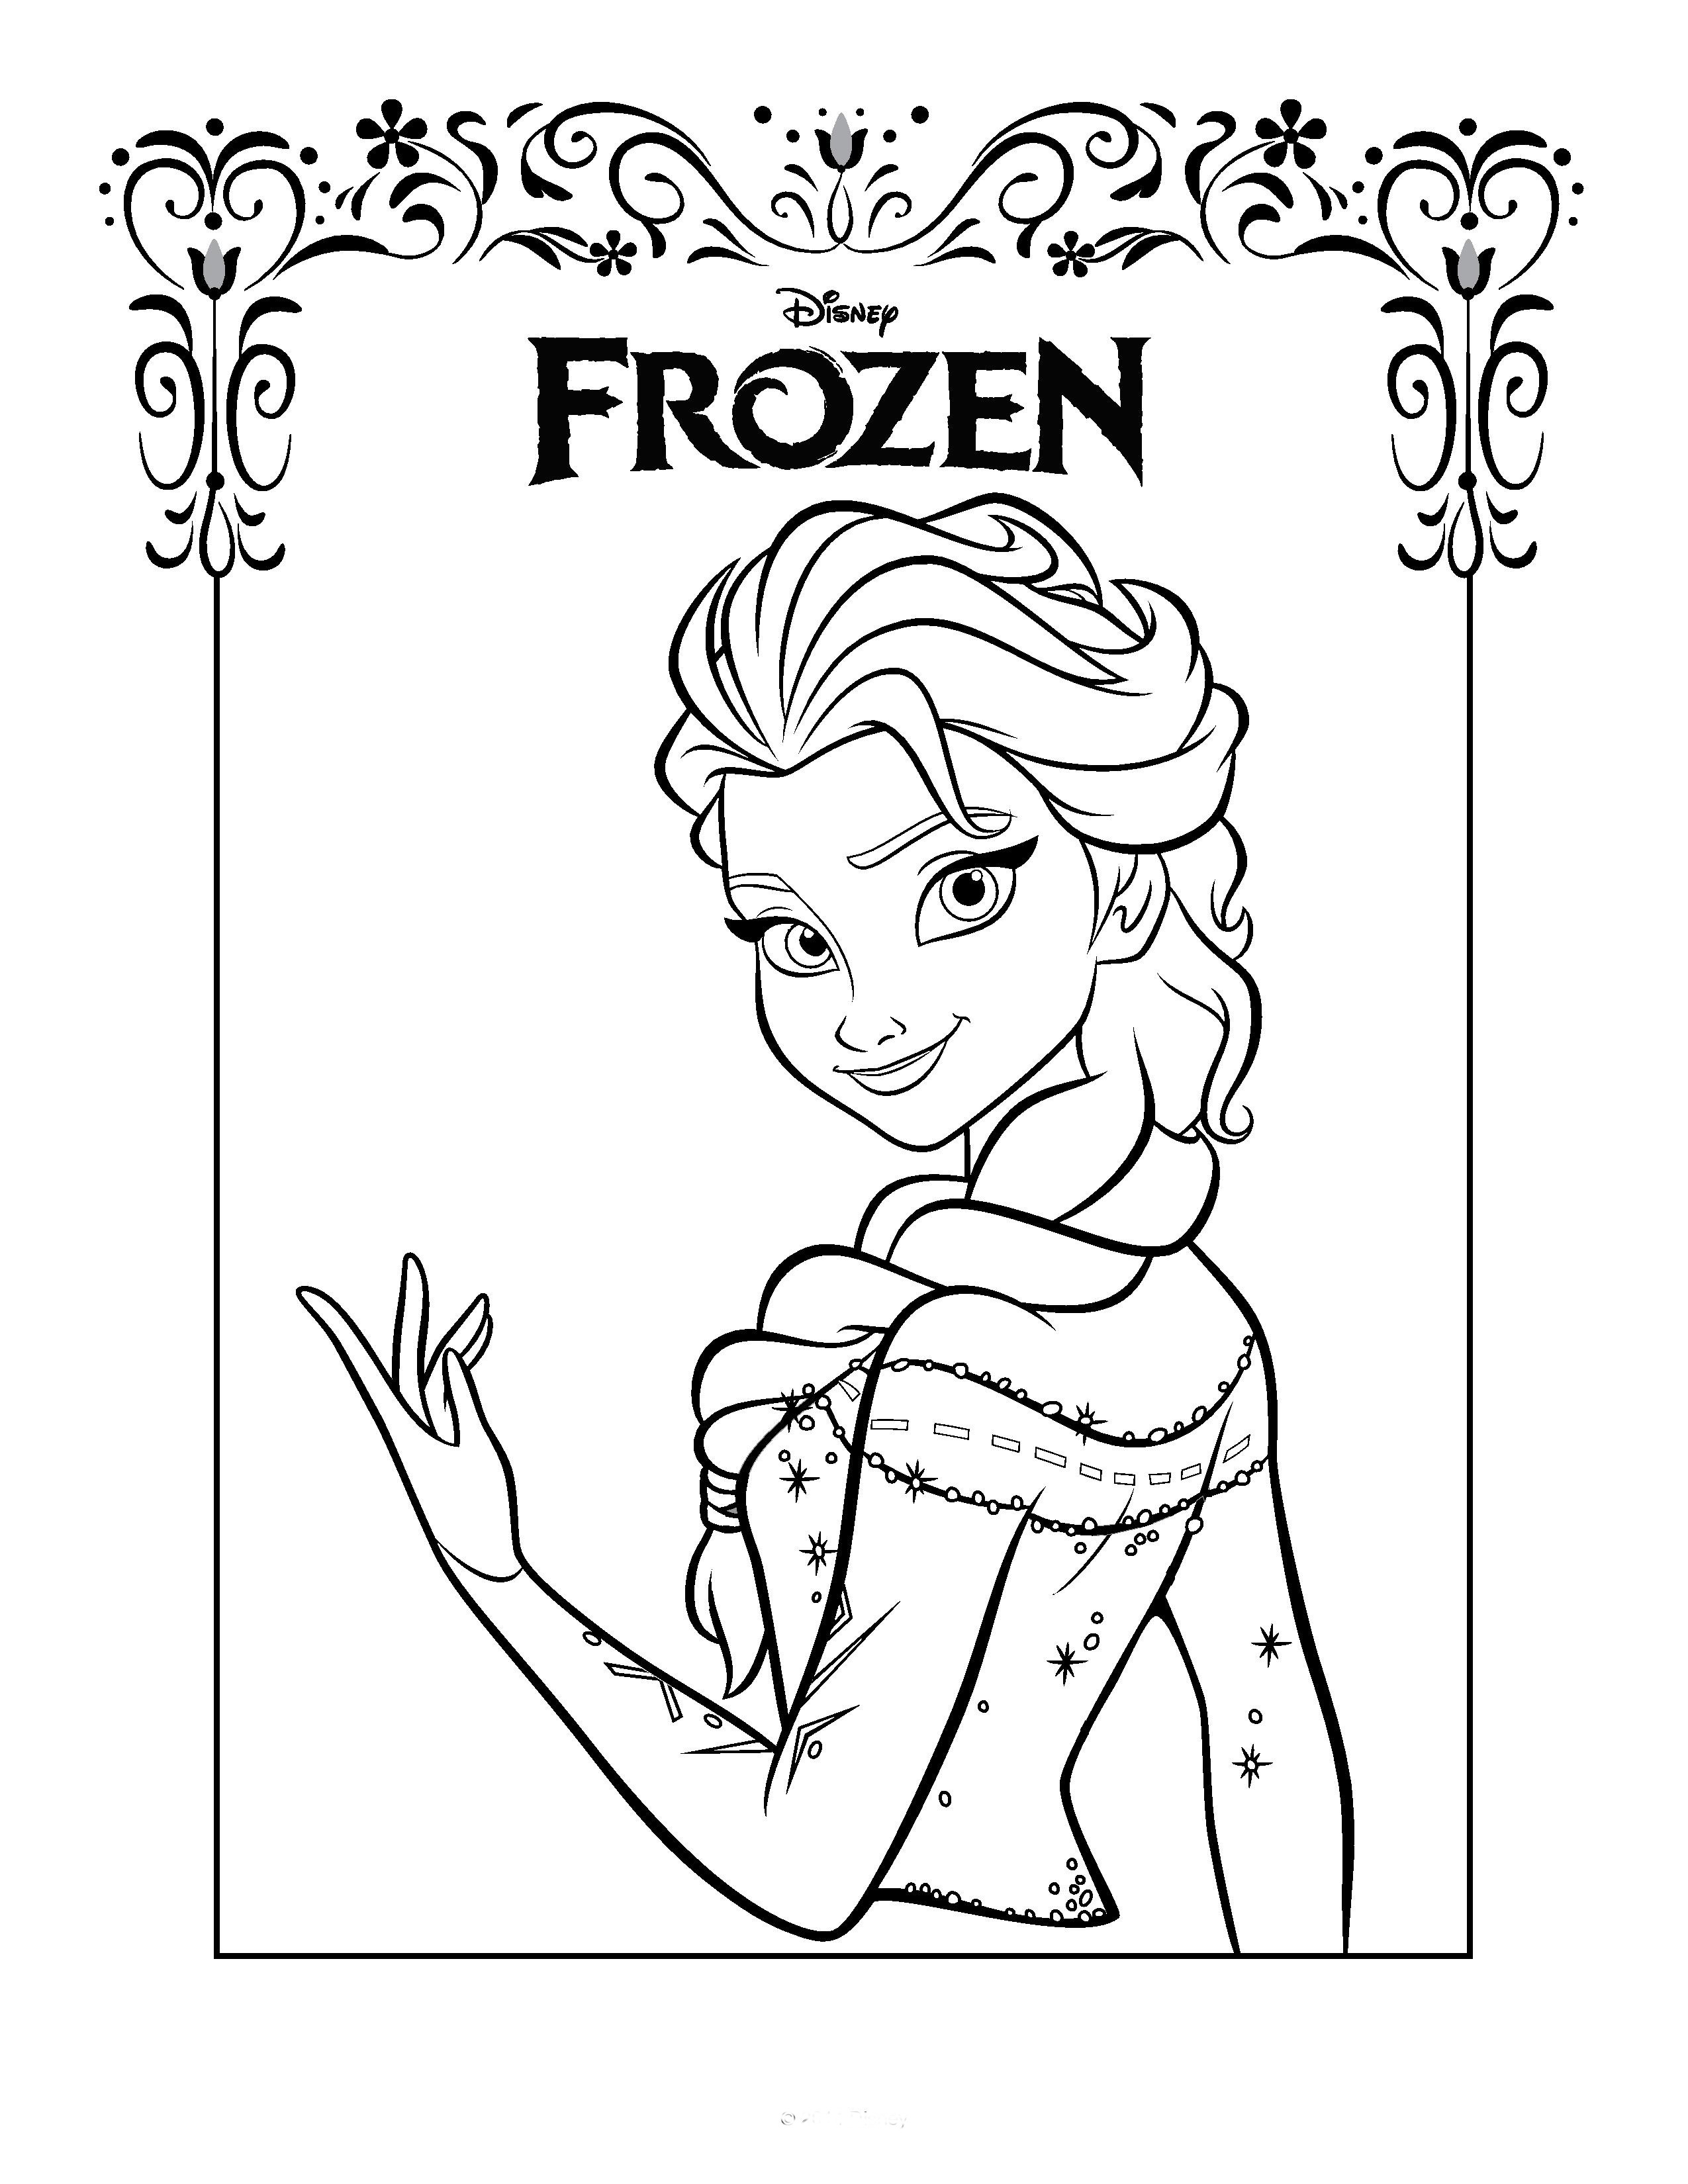 Frozen Coloring Sheets For Girls
 Free Printable Frozen Coloring Pages for Kids Best